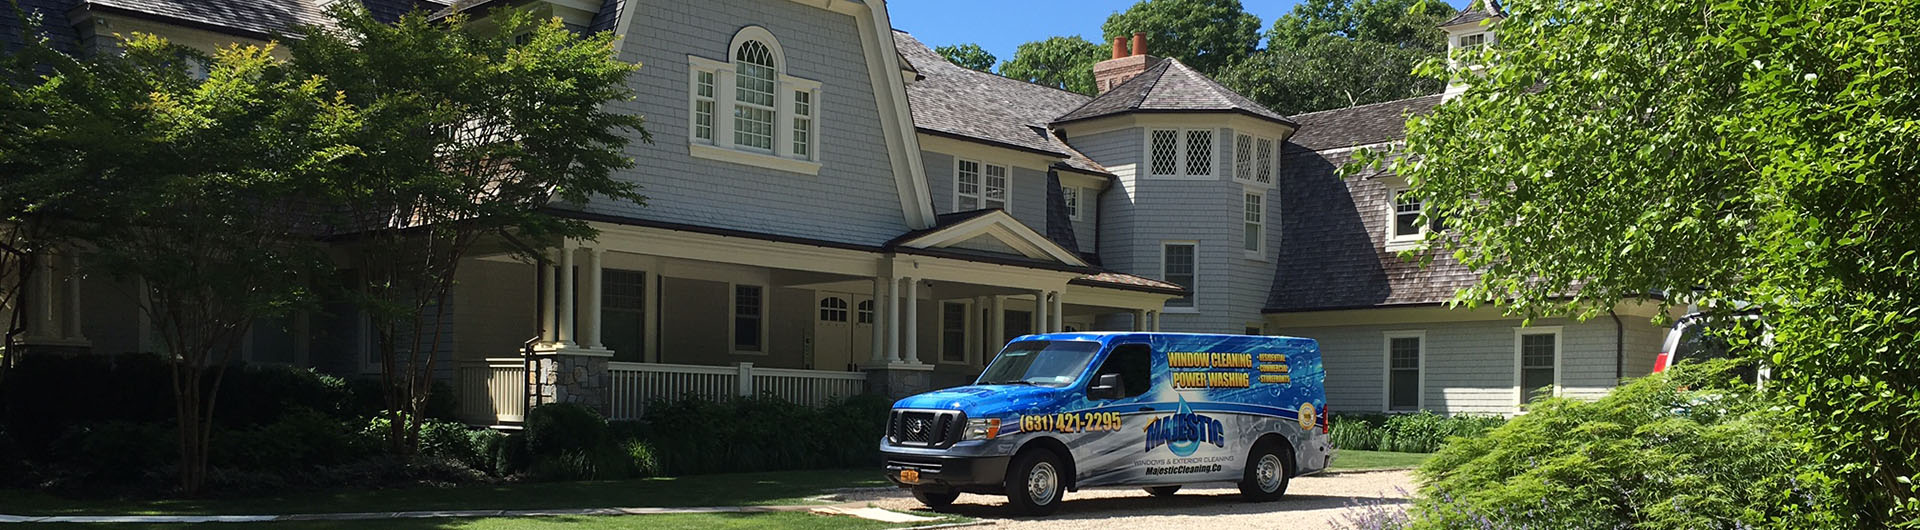 Majestic Window Cleaning and Pressure Washing service van parked outside Long Island home